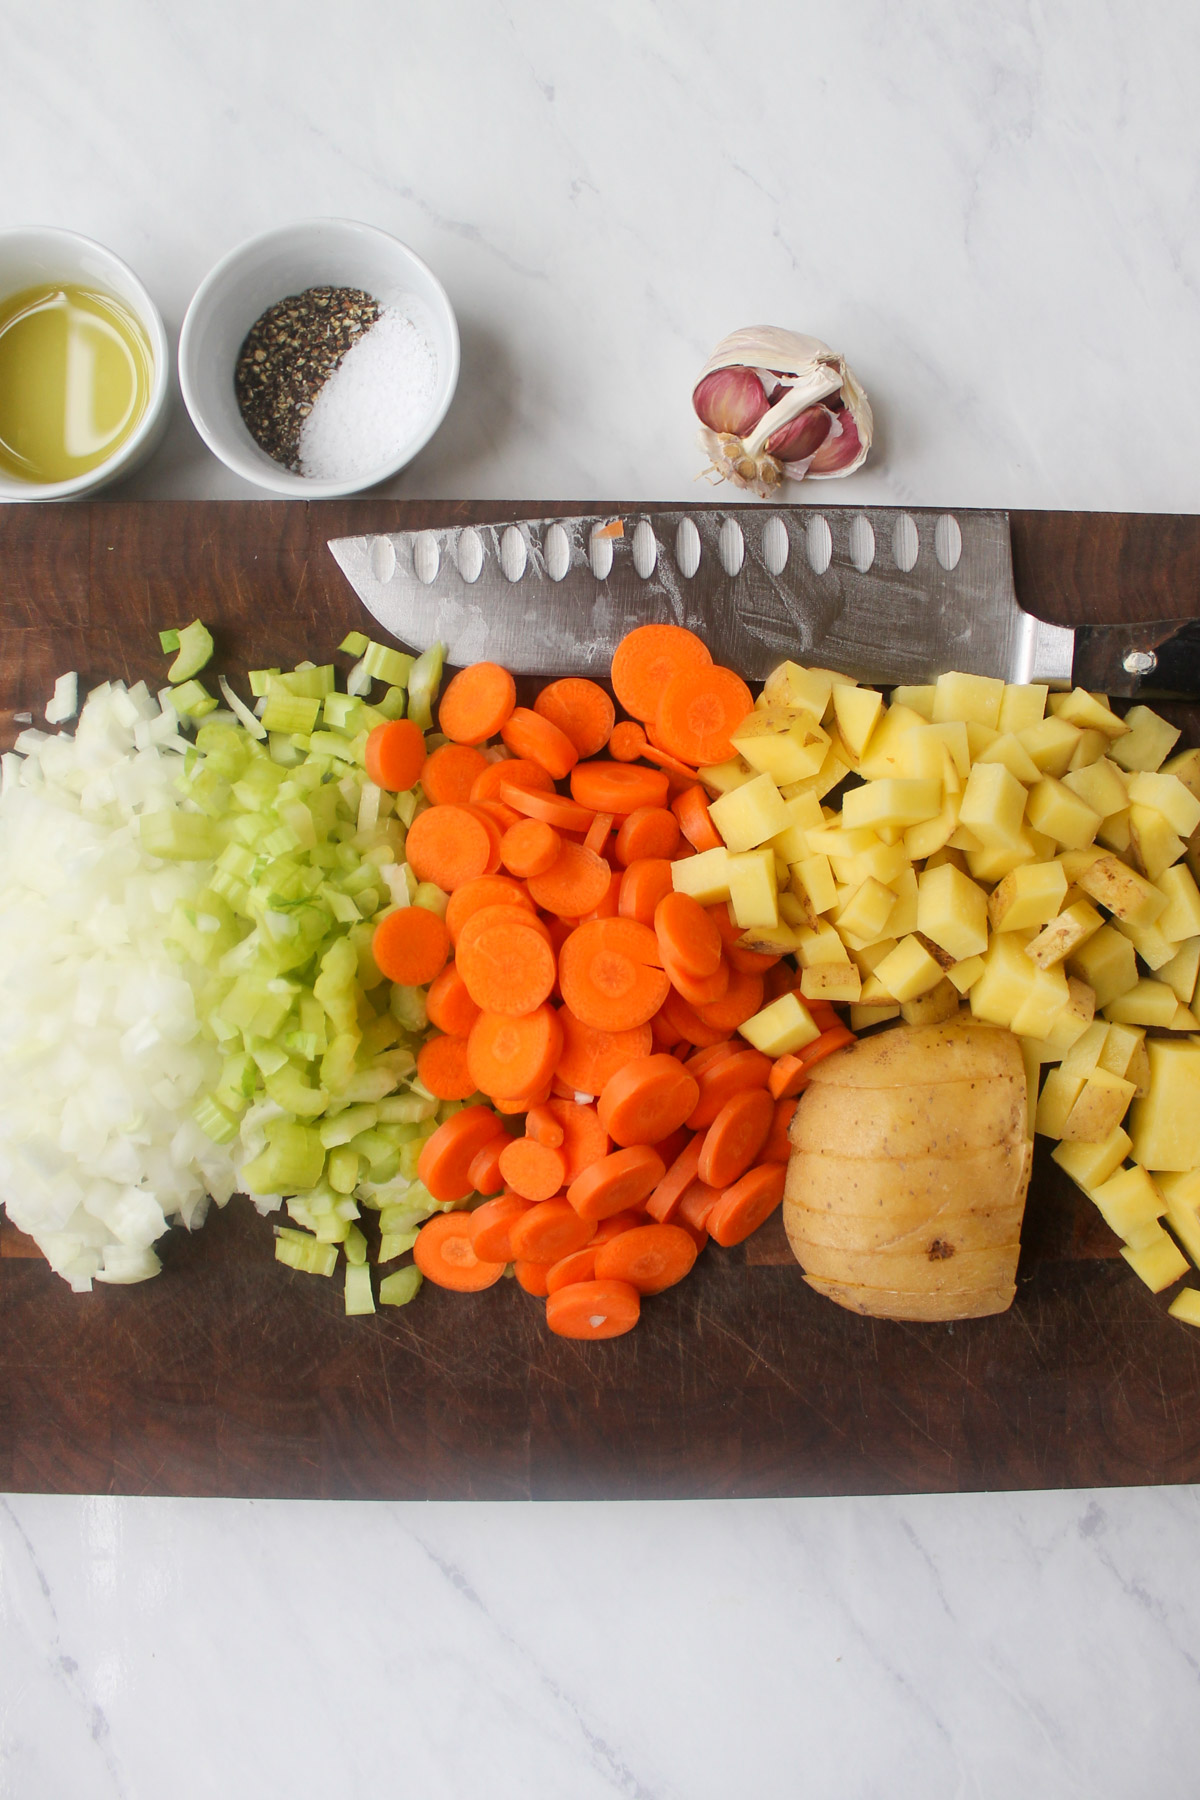 Chopped vegetables on a cutting board, onion, celery, carrots and potato.